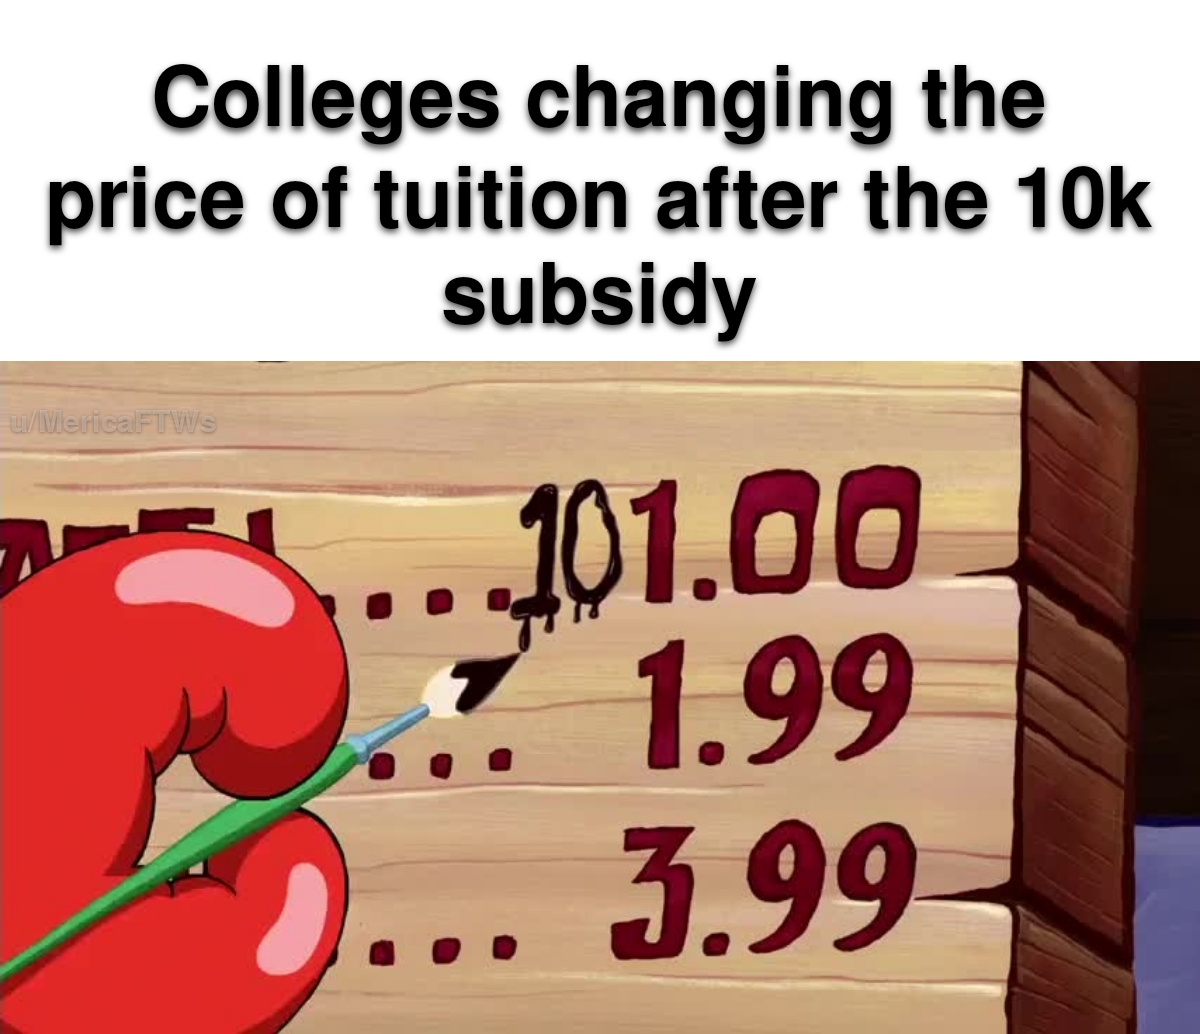 funny memes - cartoon - Colleges changing the price of tuition after the 10k subsidy Willerie Fros 101.00 1.99 3.99